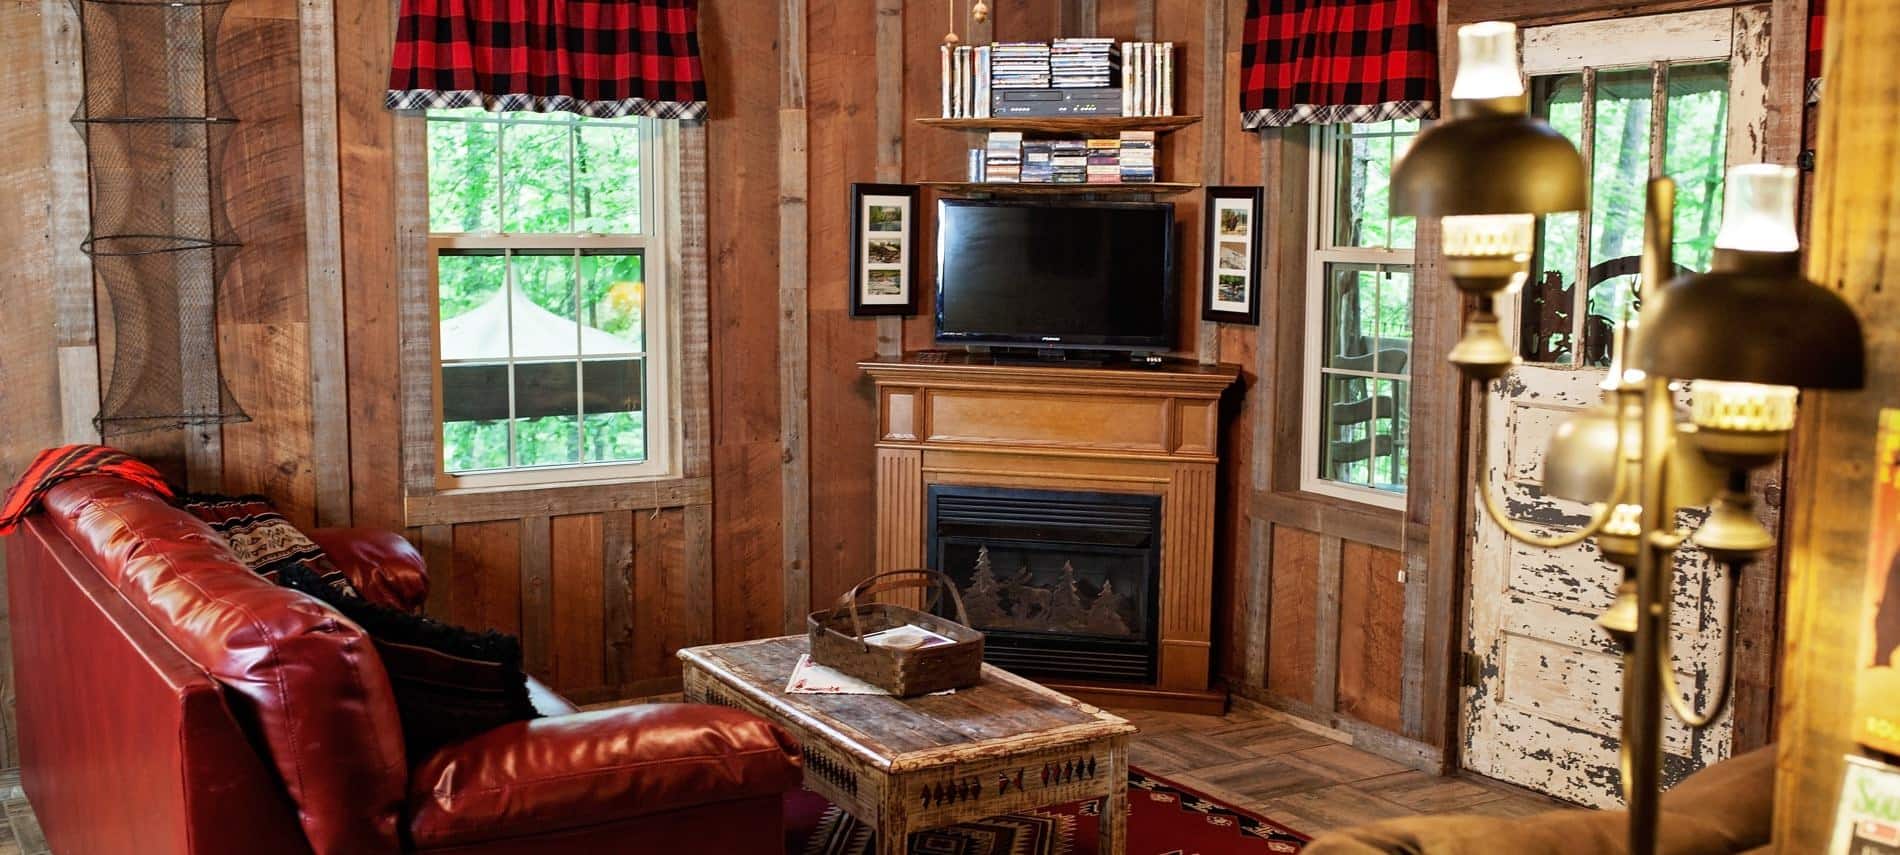 Wood cabin interior with corner fireplace, TV, several windows, and leather sofa with coffee table